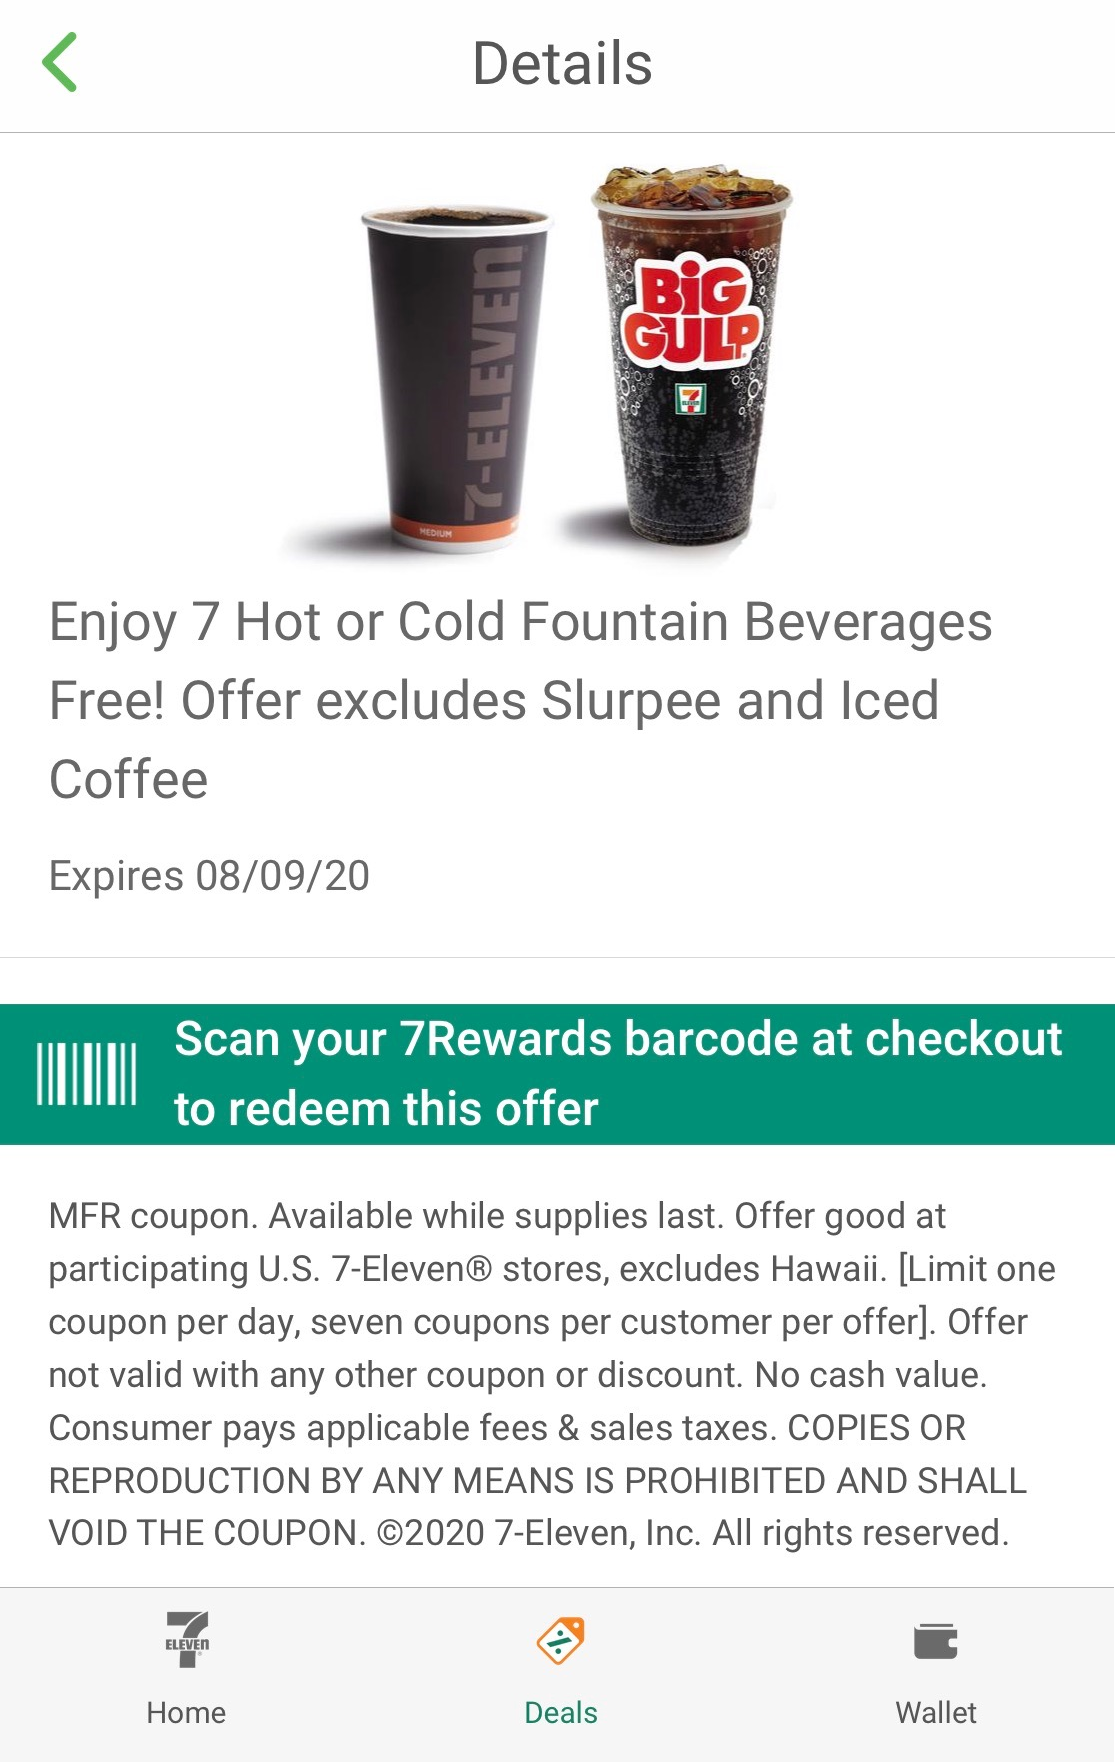 Check Your App for 7 Free Hot or Cold Beverages at 7-Eleven!